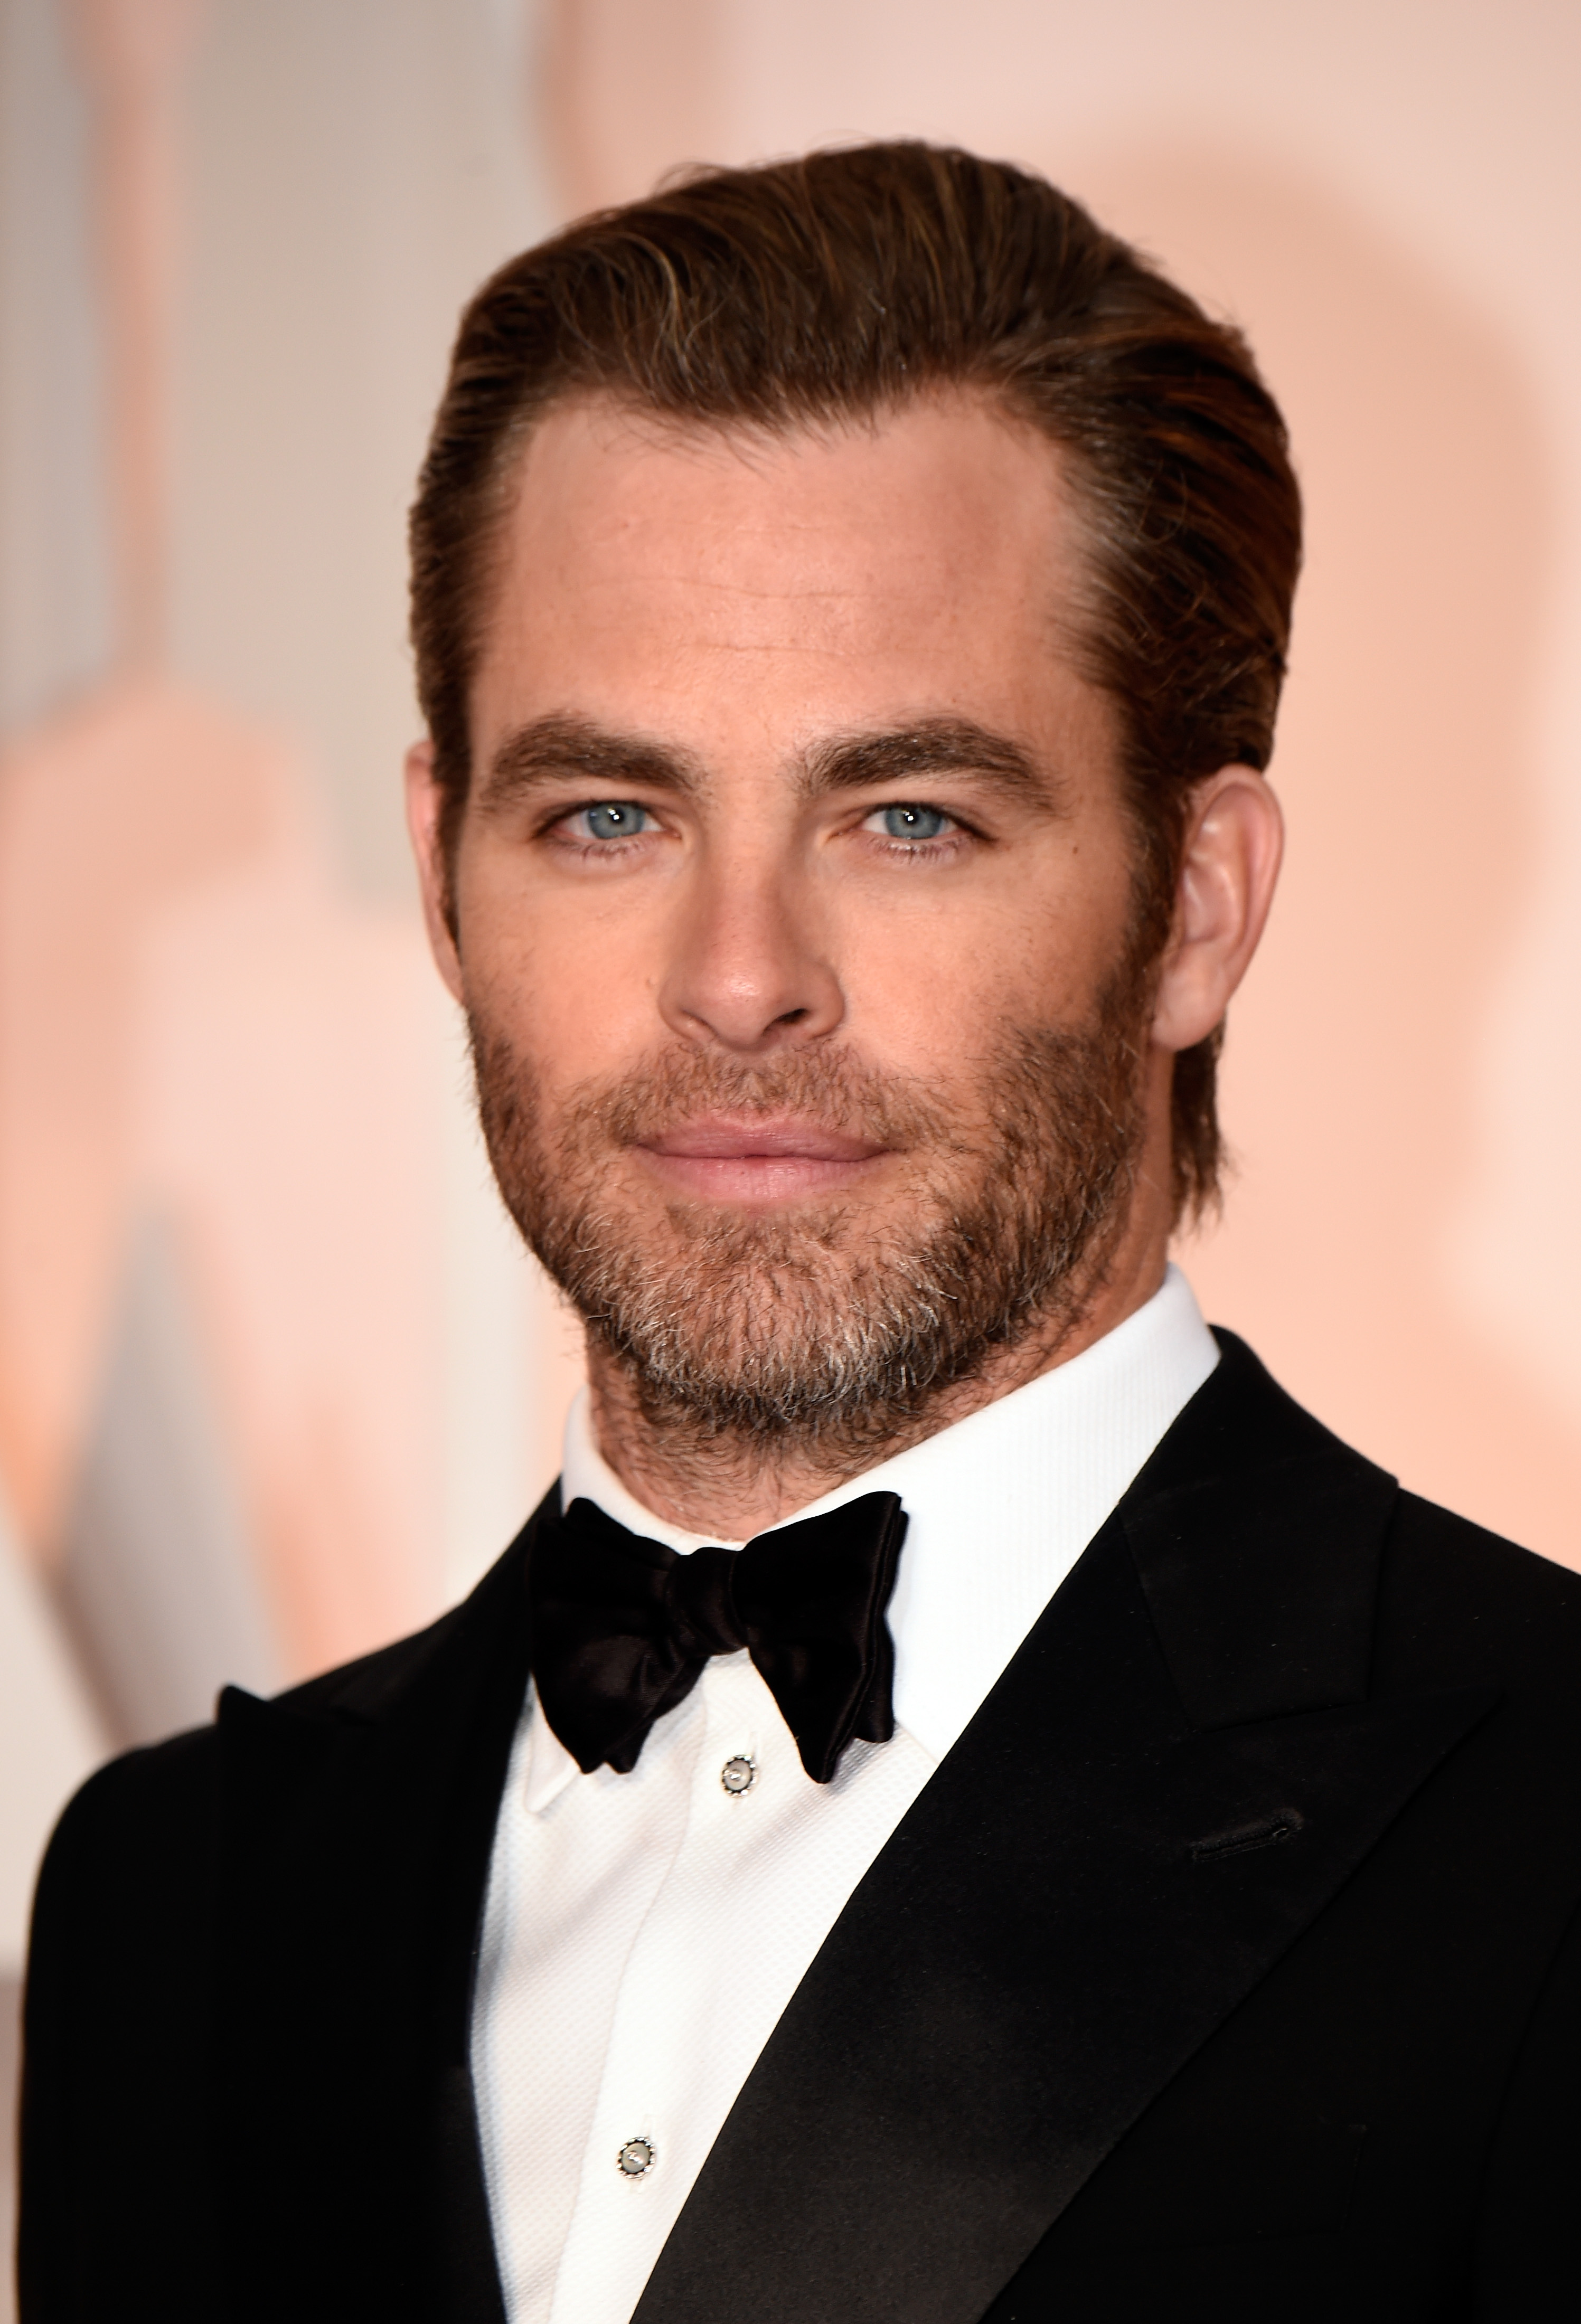 Chris Pine at the 87th Annual Academy Awards on February 22, 2015 in Hollywood, California. | Source: Getty Images